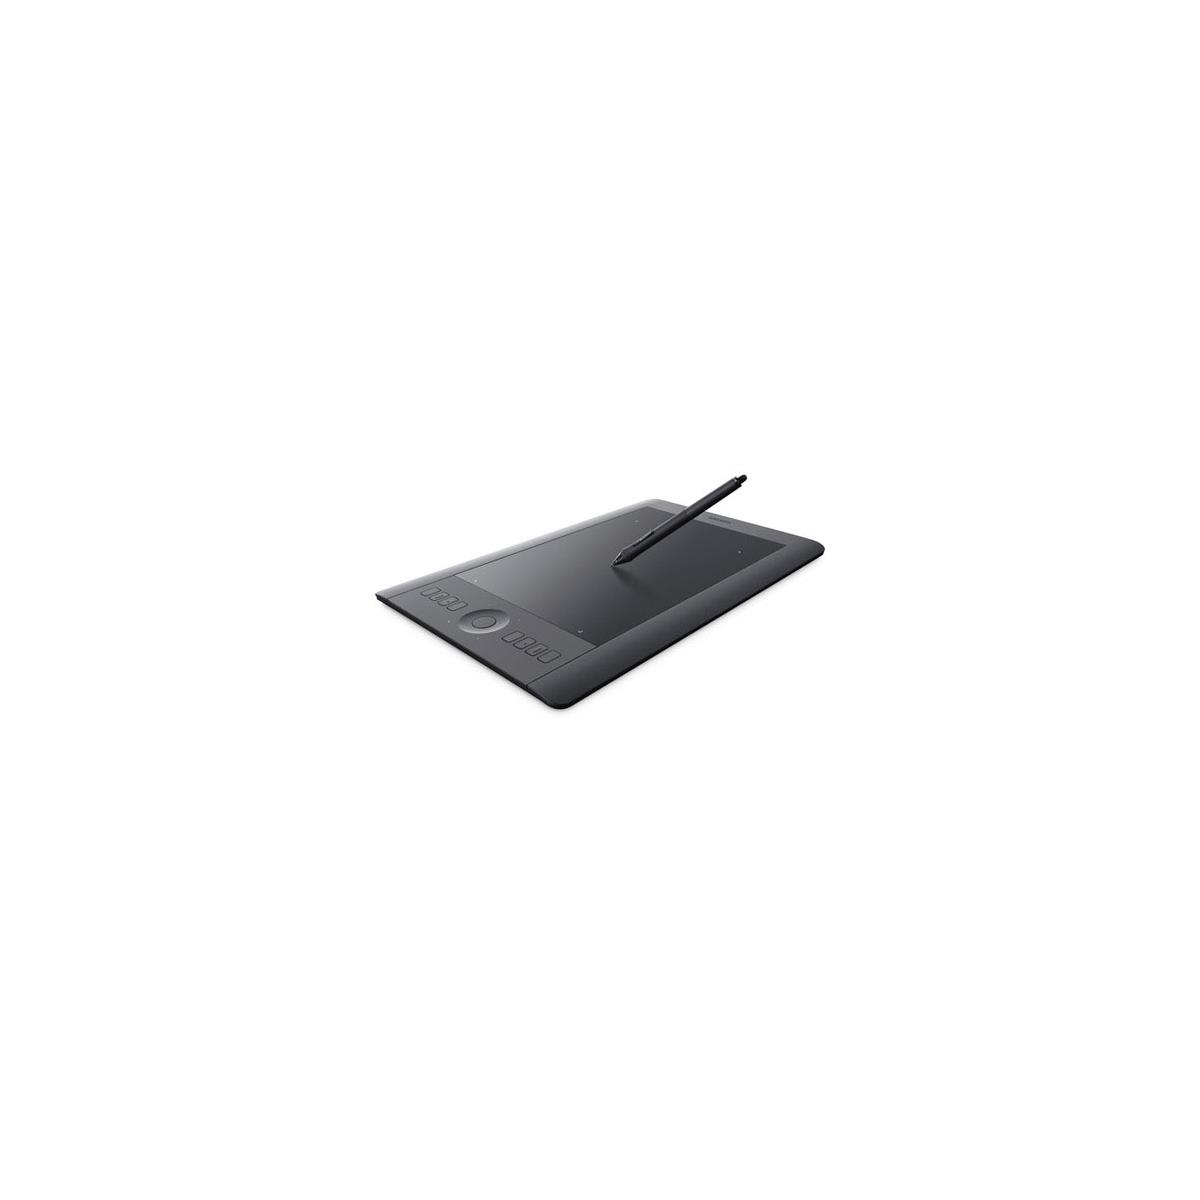 Image of Wacom PTH651 Intuos Pro Pen and Touch Tablet